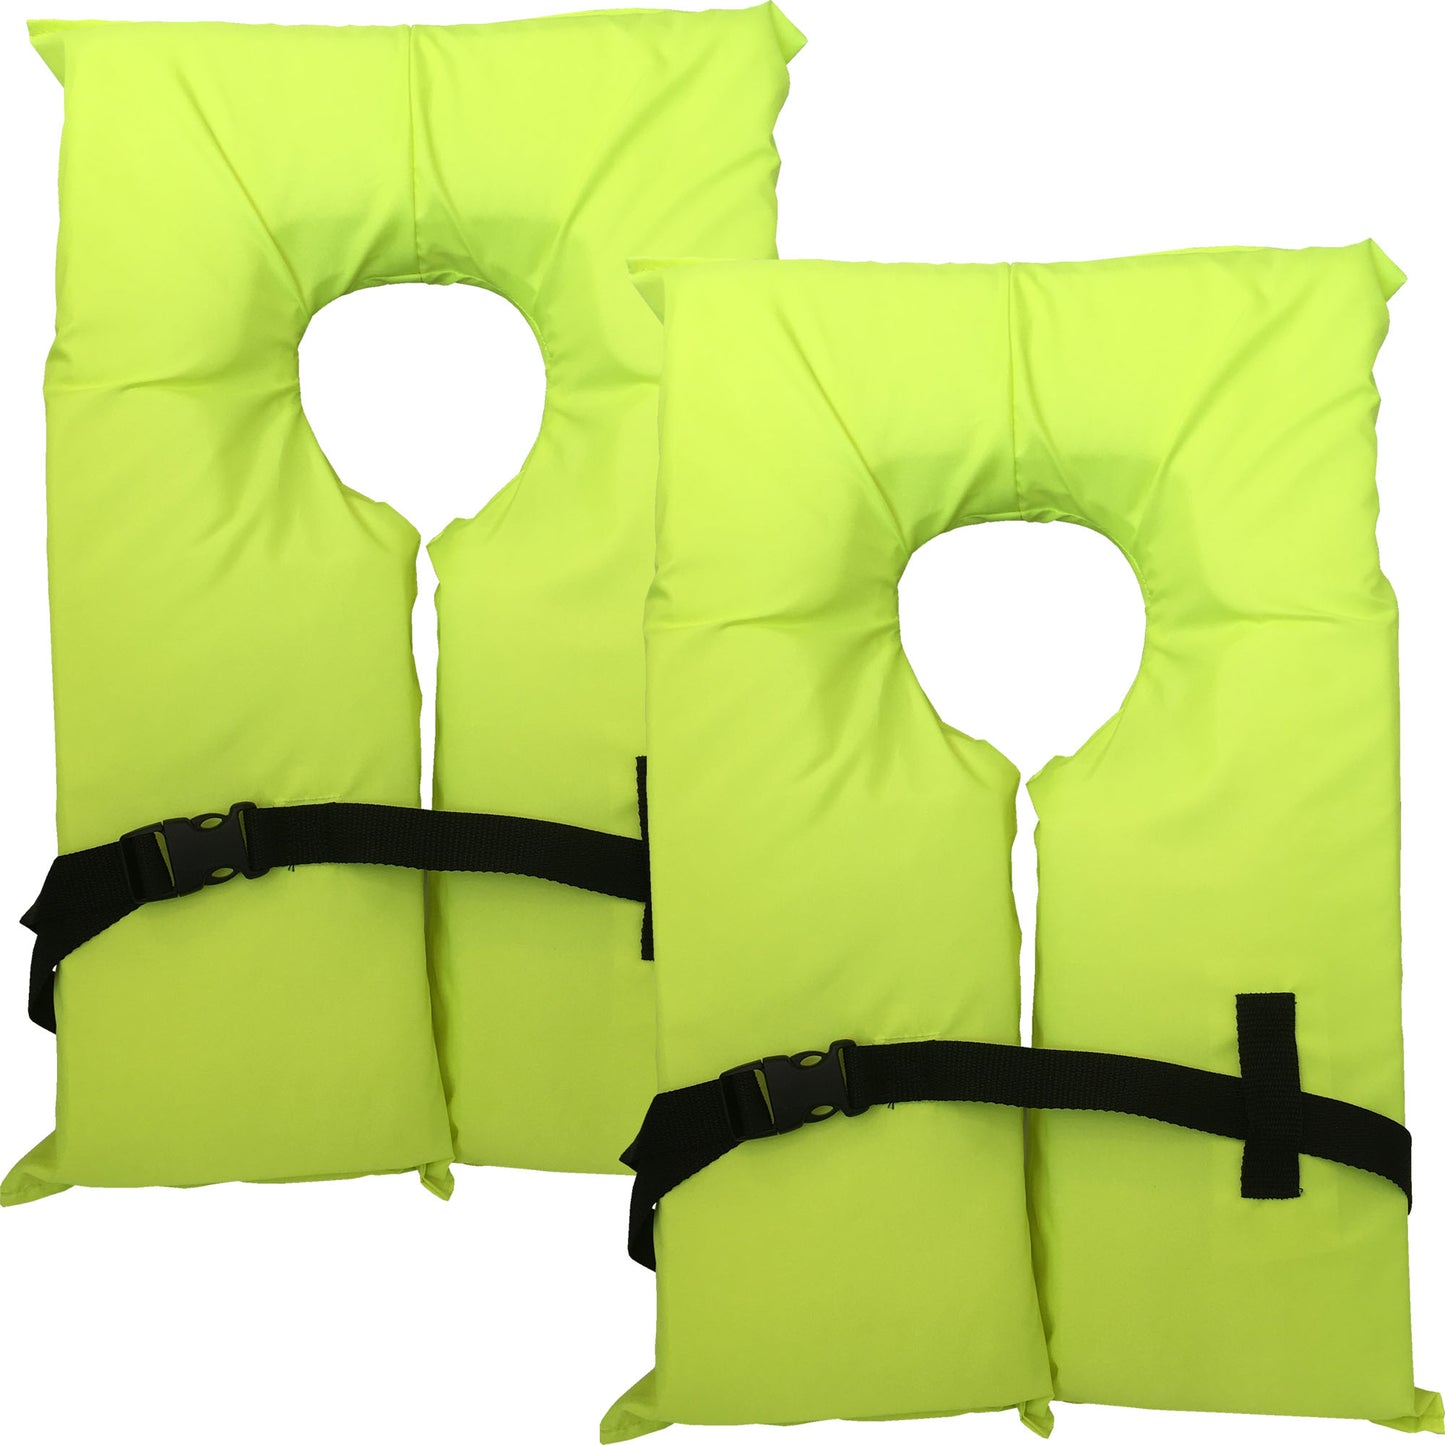 Hardcore Coast Guard approved life jackets for adults.  High visibility neon yellow color Type II keyhole life vest in classic May West style. Compliance life vests and flotation device (2 pack)